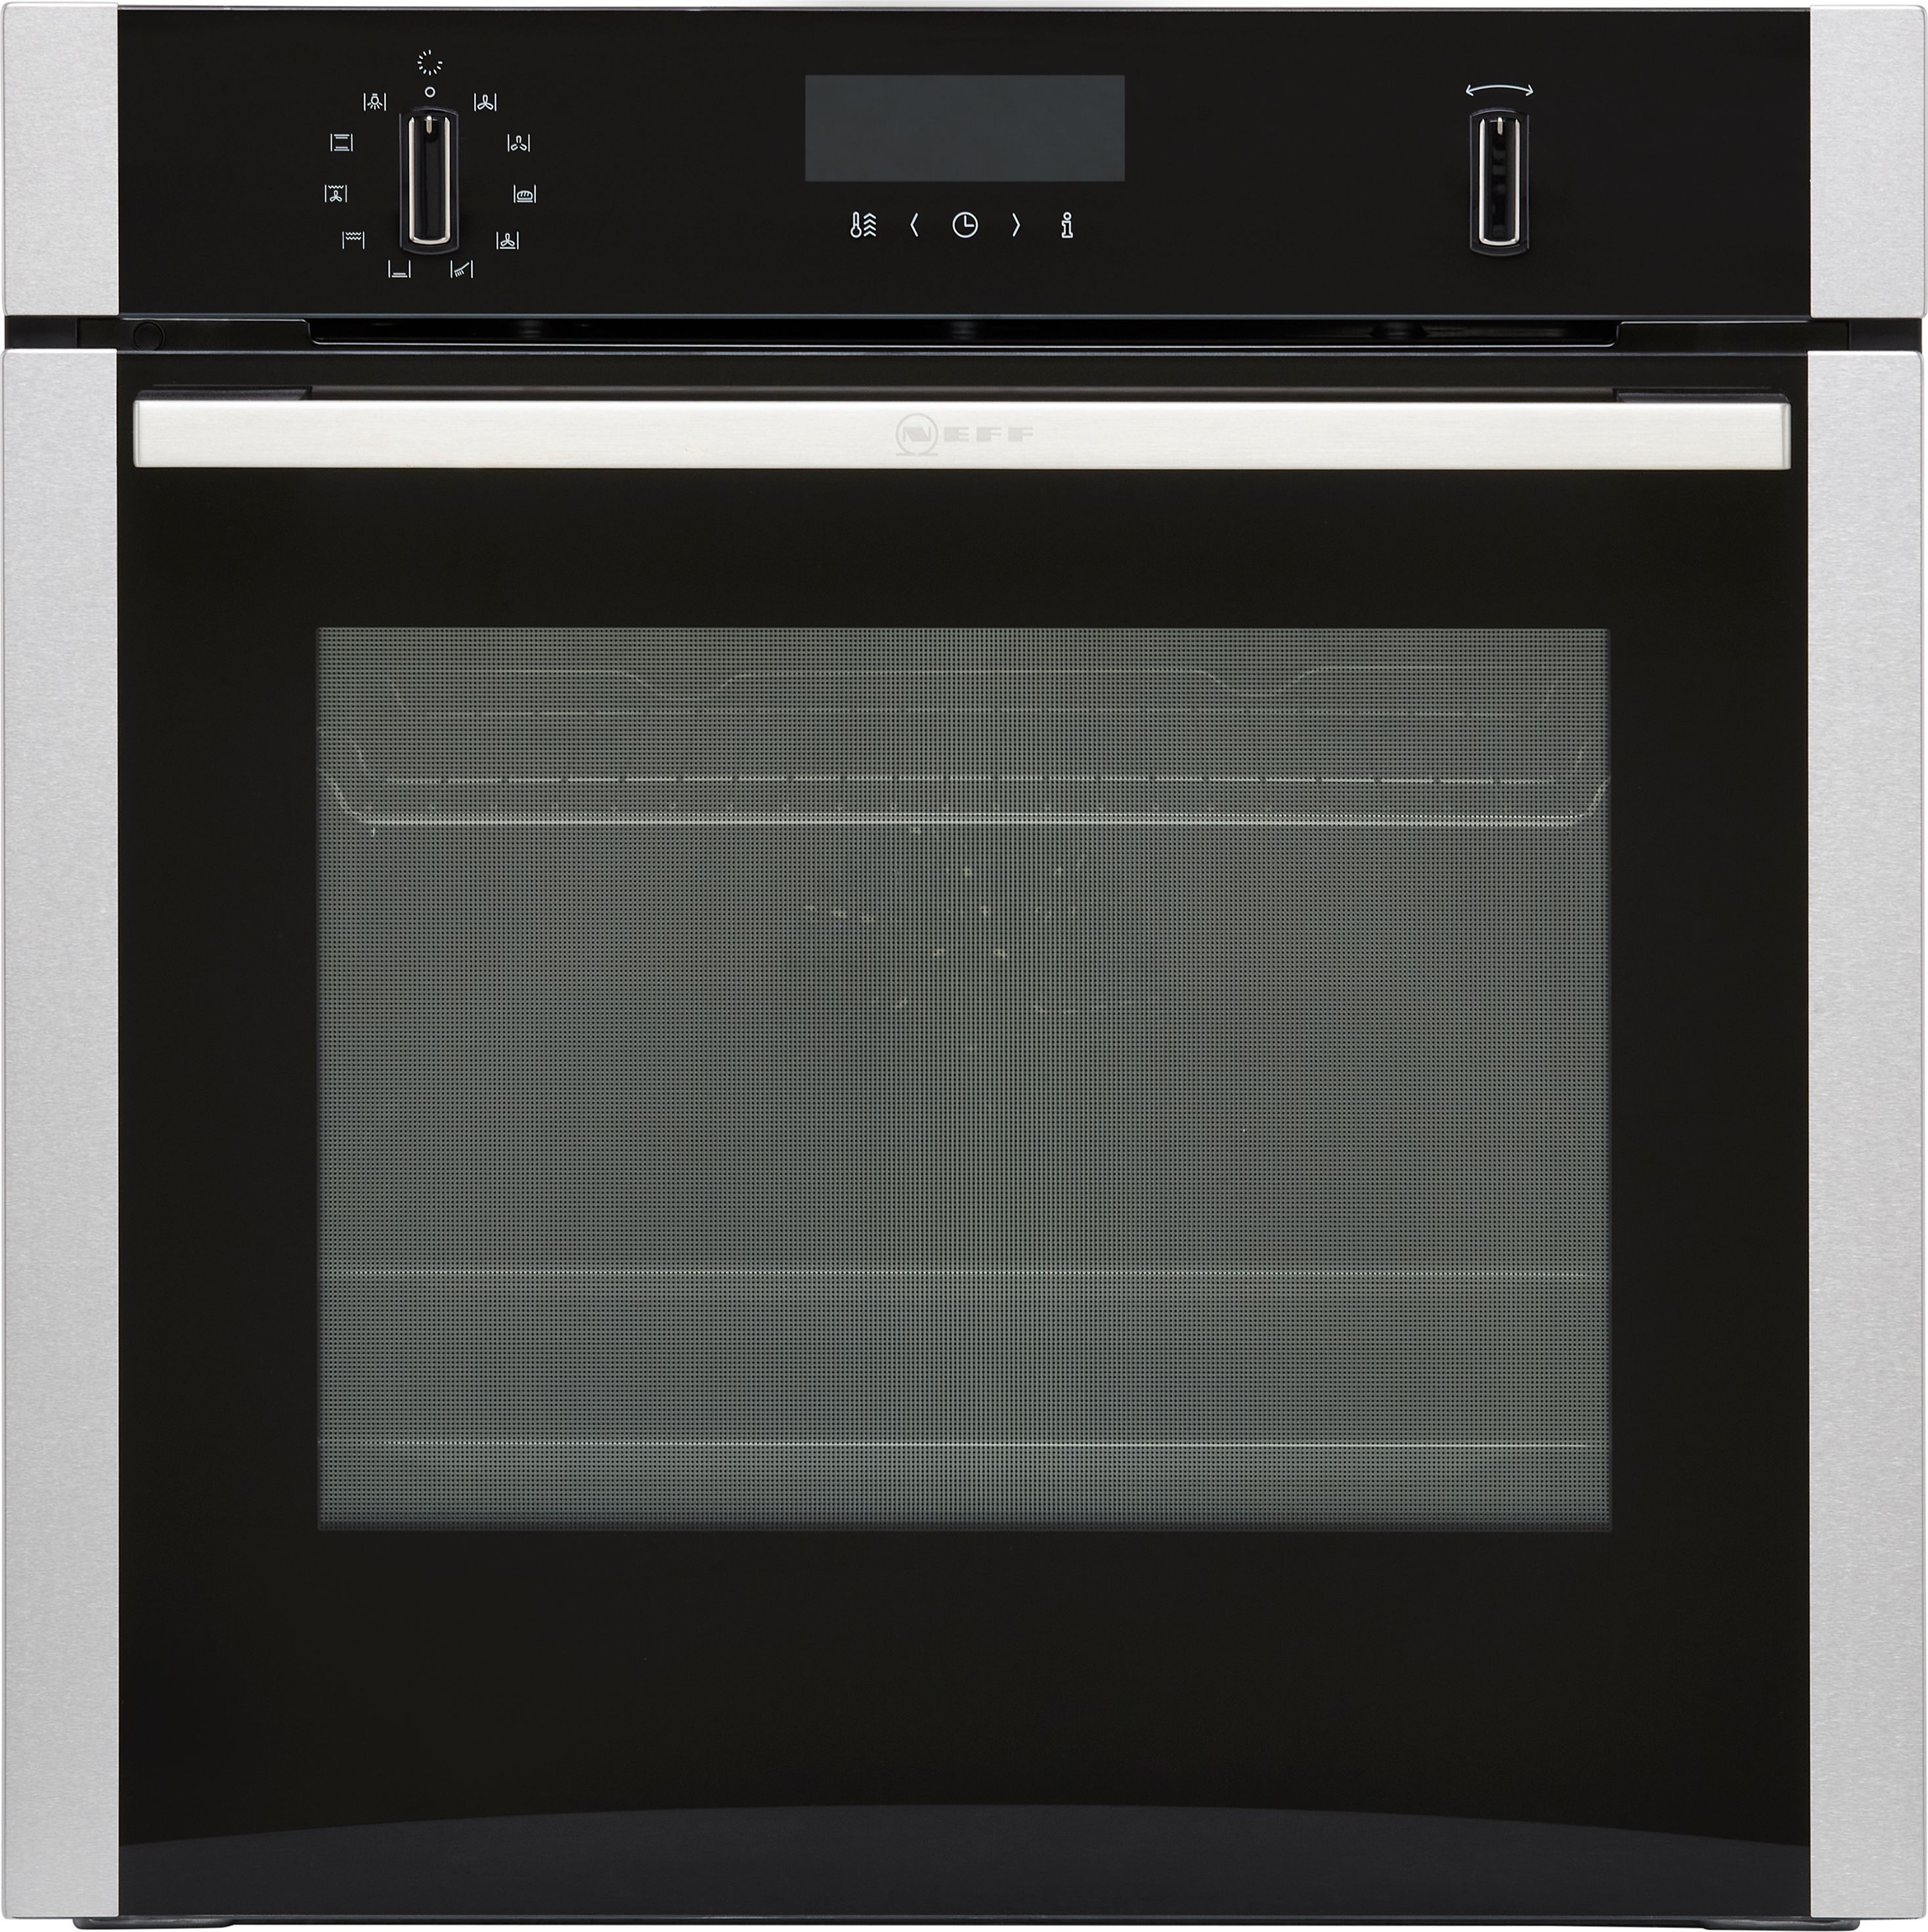 NEFF N50 B2ACH7HN0 Built In Electric Single Oven with Pyrolytic Cleaning - Stainless Steel - A Rated, Stainless Steel